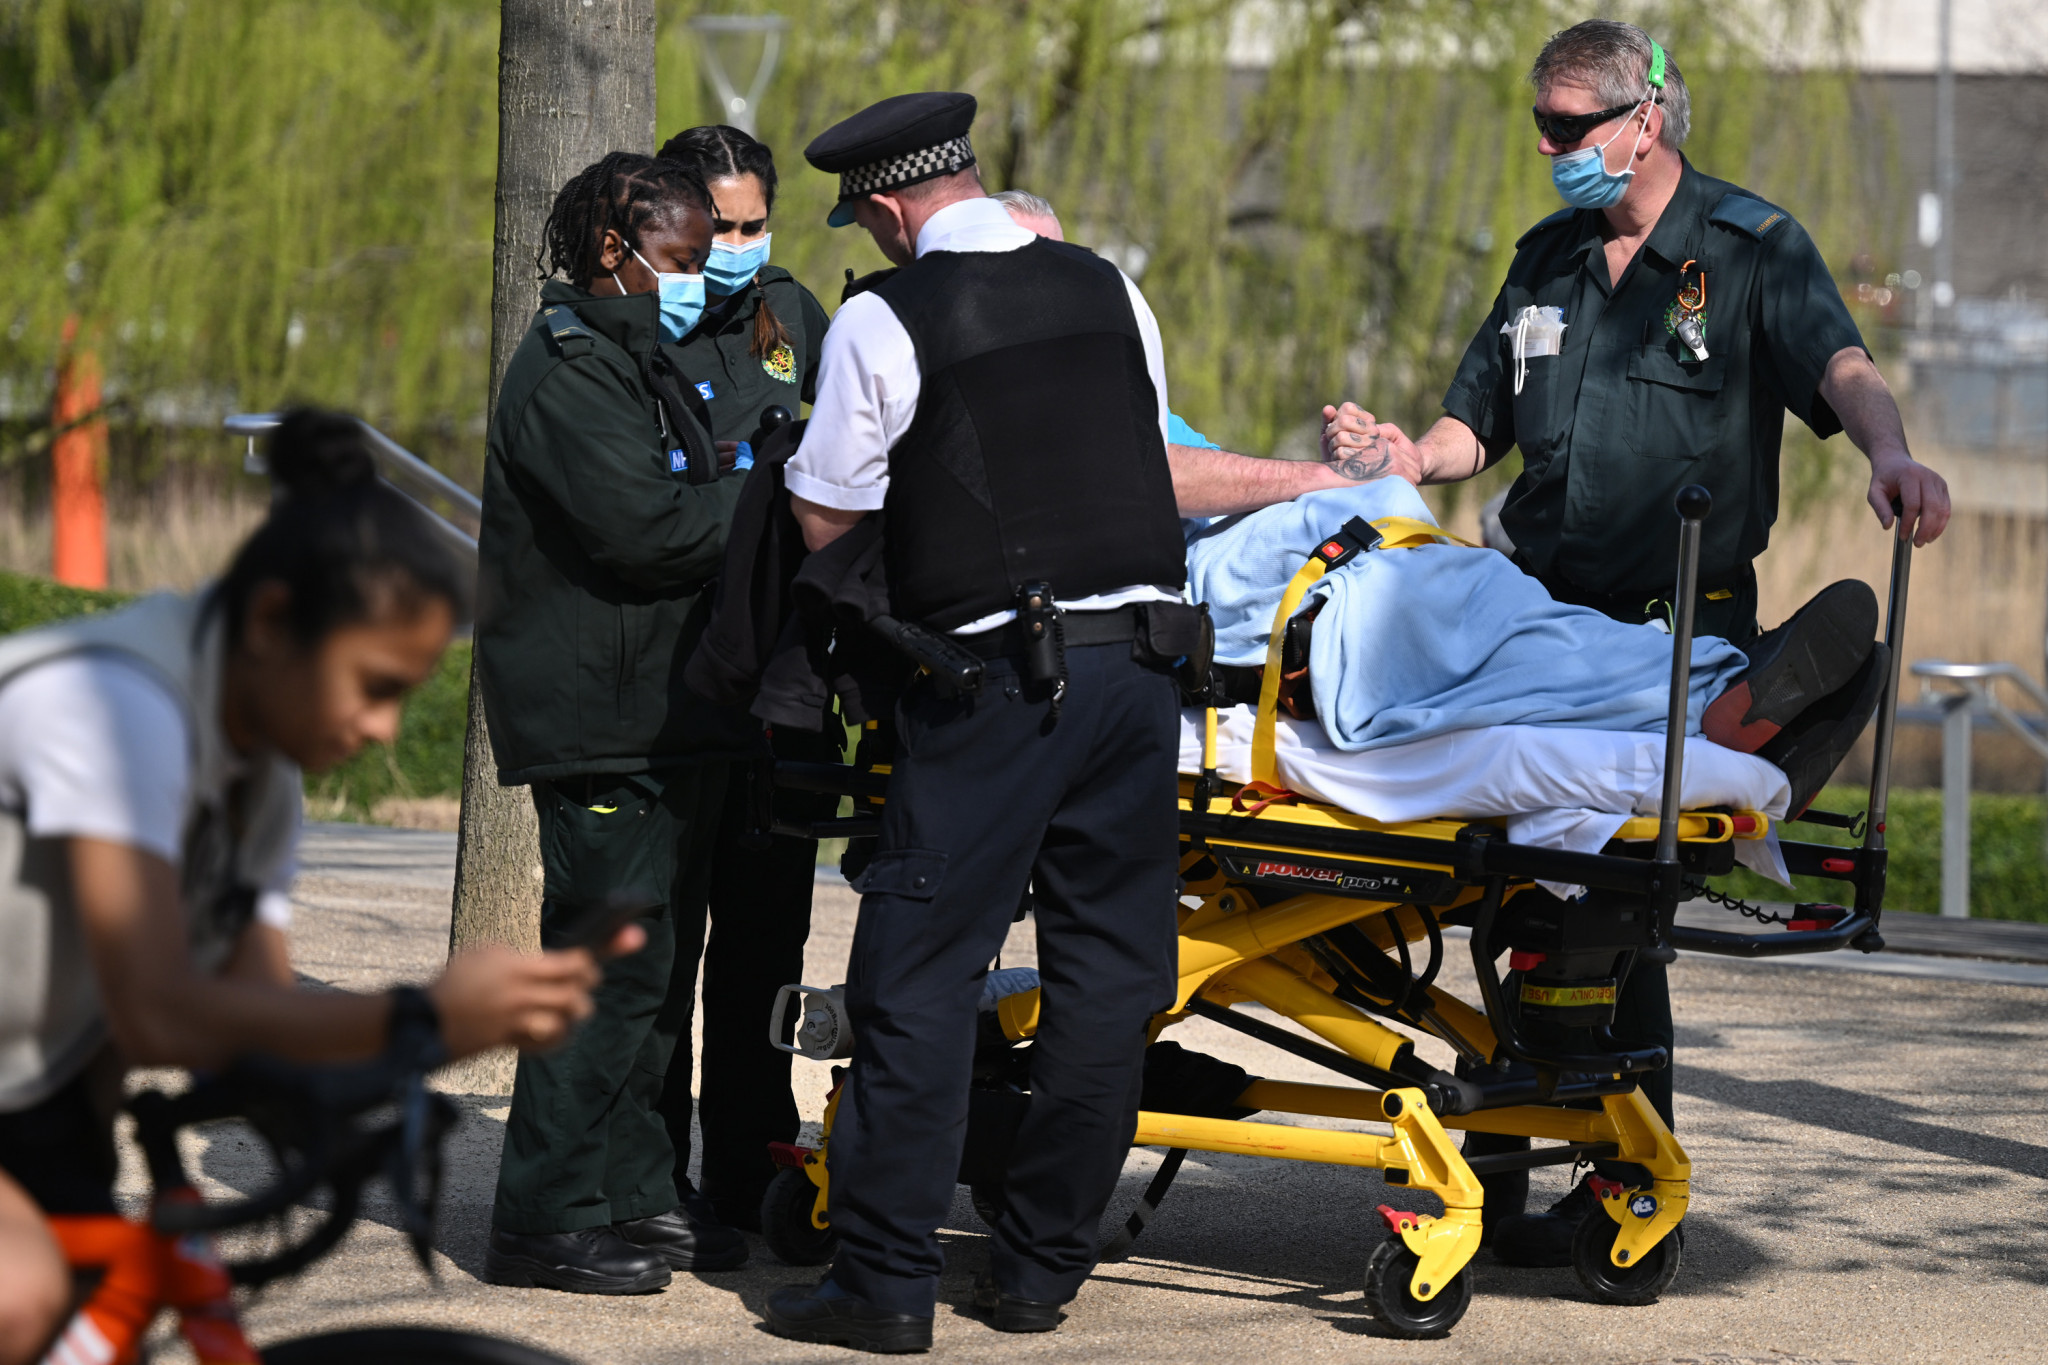 A person is treated after the gas leak at the London Aquatics Centre ©Getty Images